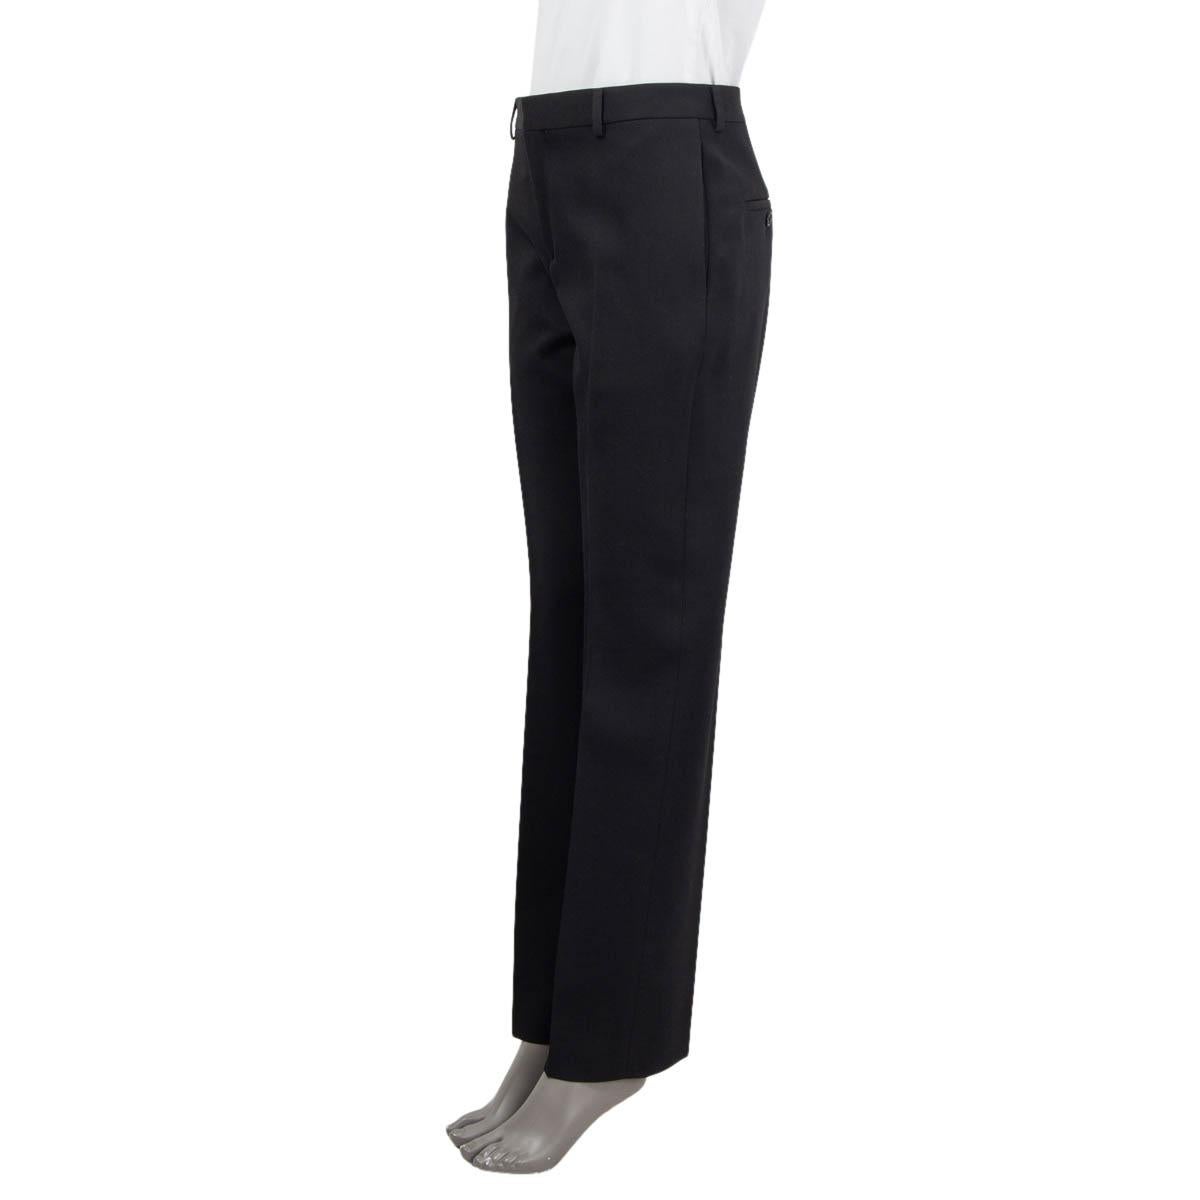 100% authentic Celine straight leg pleated pants in black wool (100%). Feature two side slit pockets, belt loops and two buttoned, sewn shut slit pockets at the back. Open with a concealed hook, button and zipper on the front. Pockets lined in black